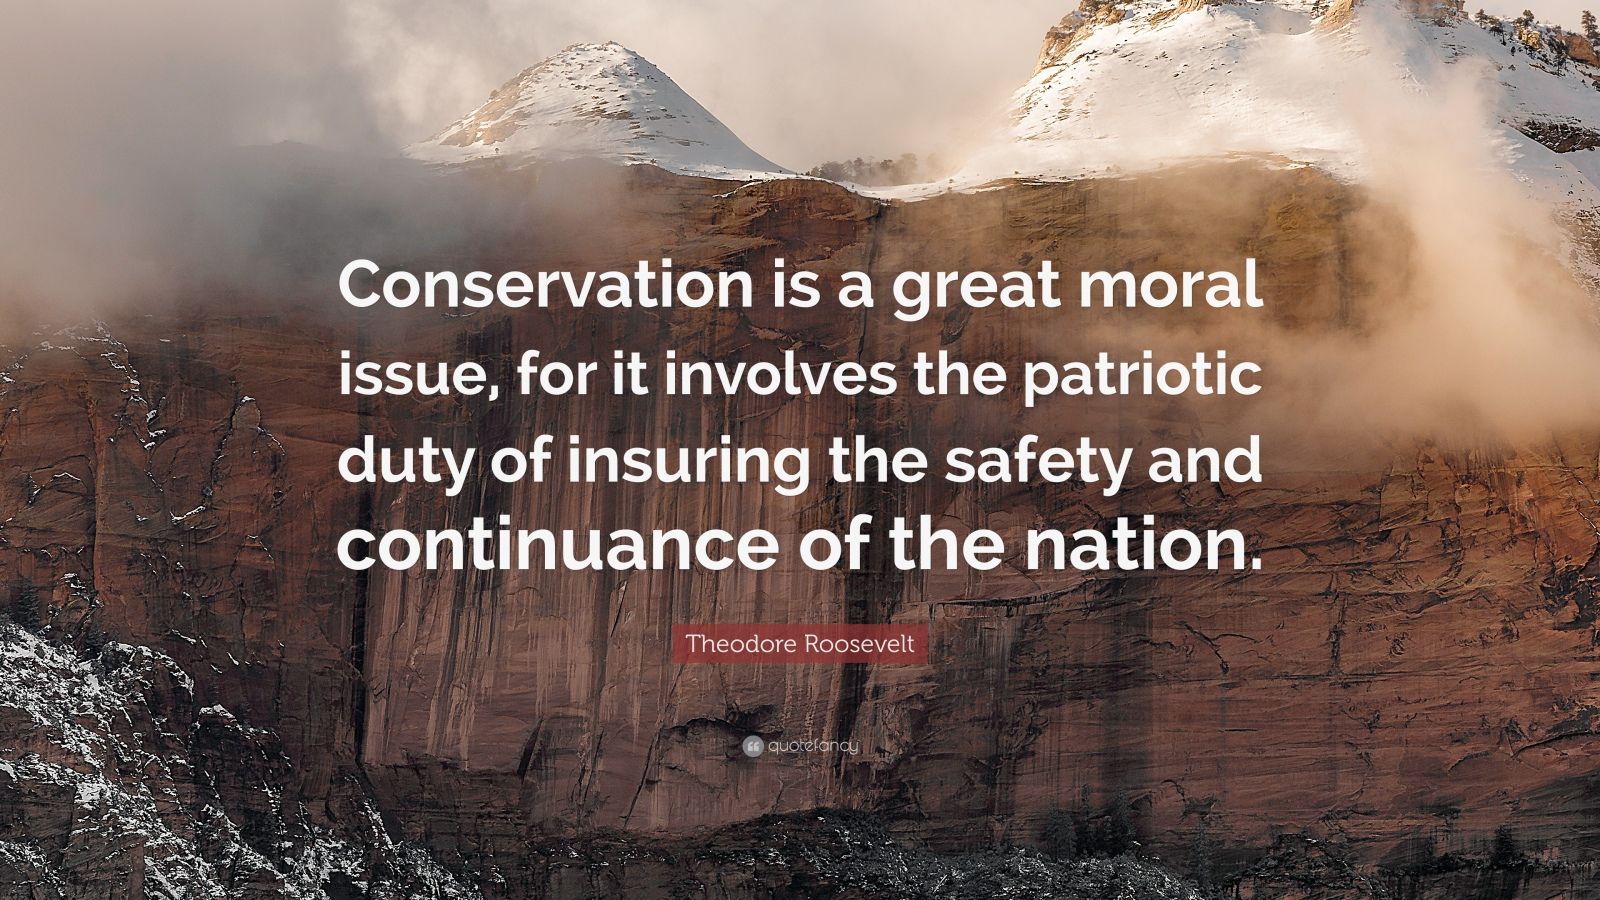 Theodore Roosevelt Quote: “Conservation is a great moral issue, for it involves the patriotic duty of insuring the safety and continuance of the na.”